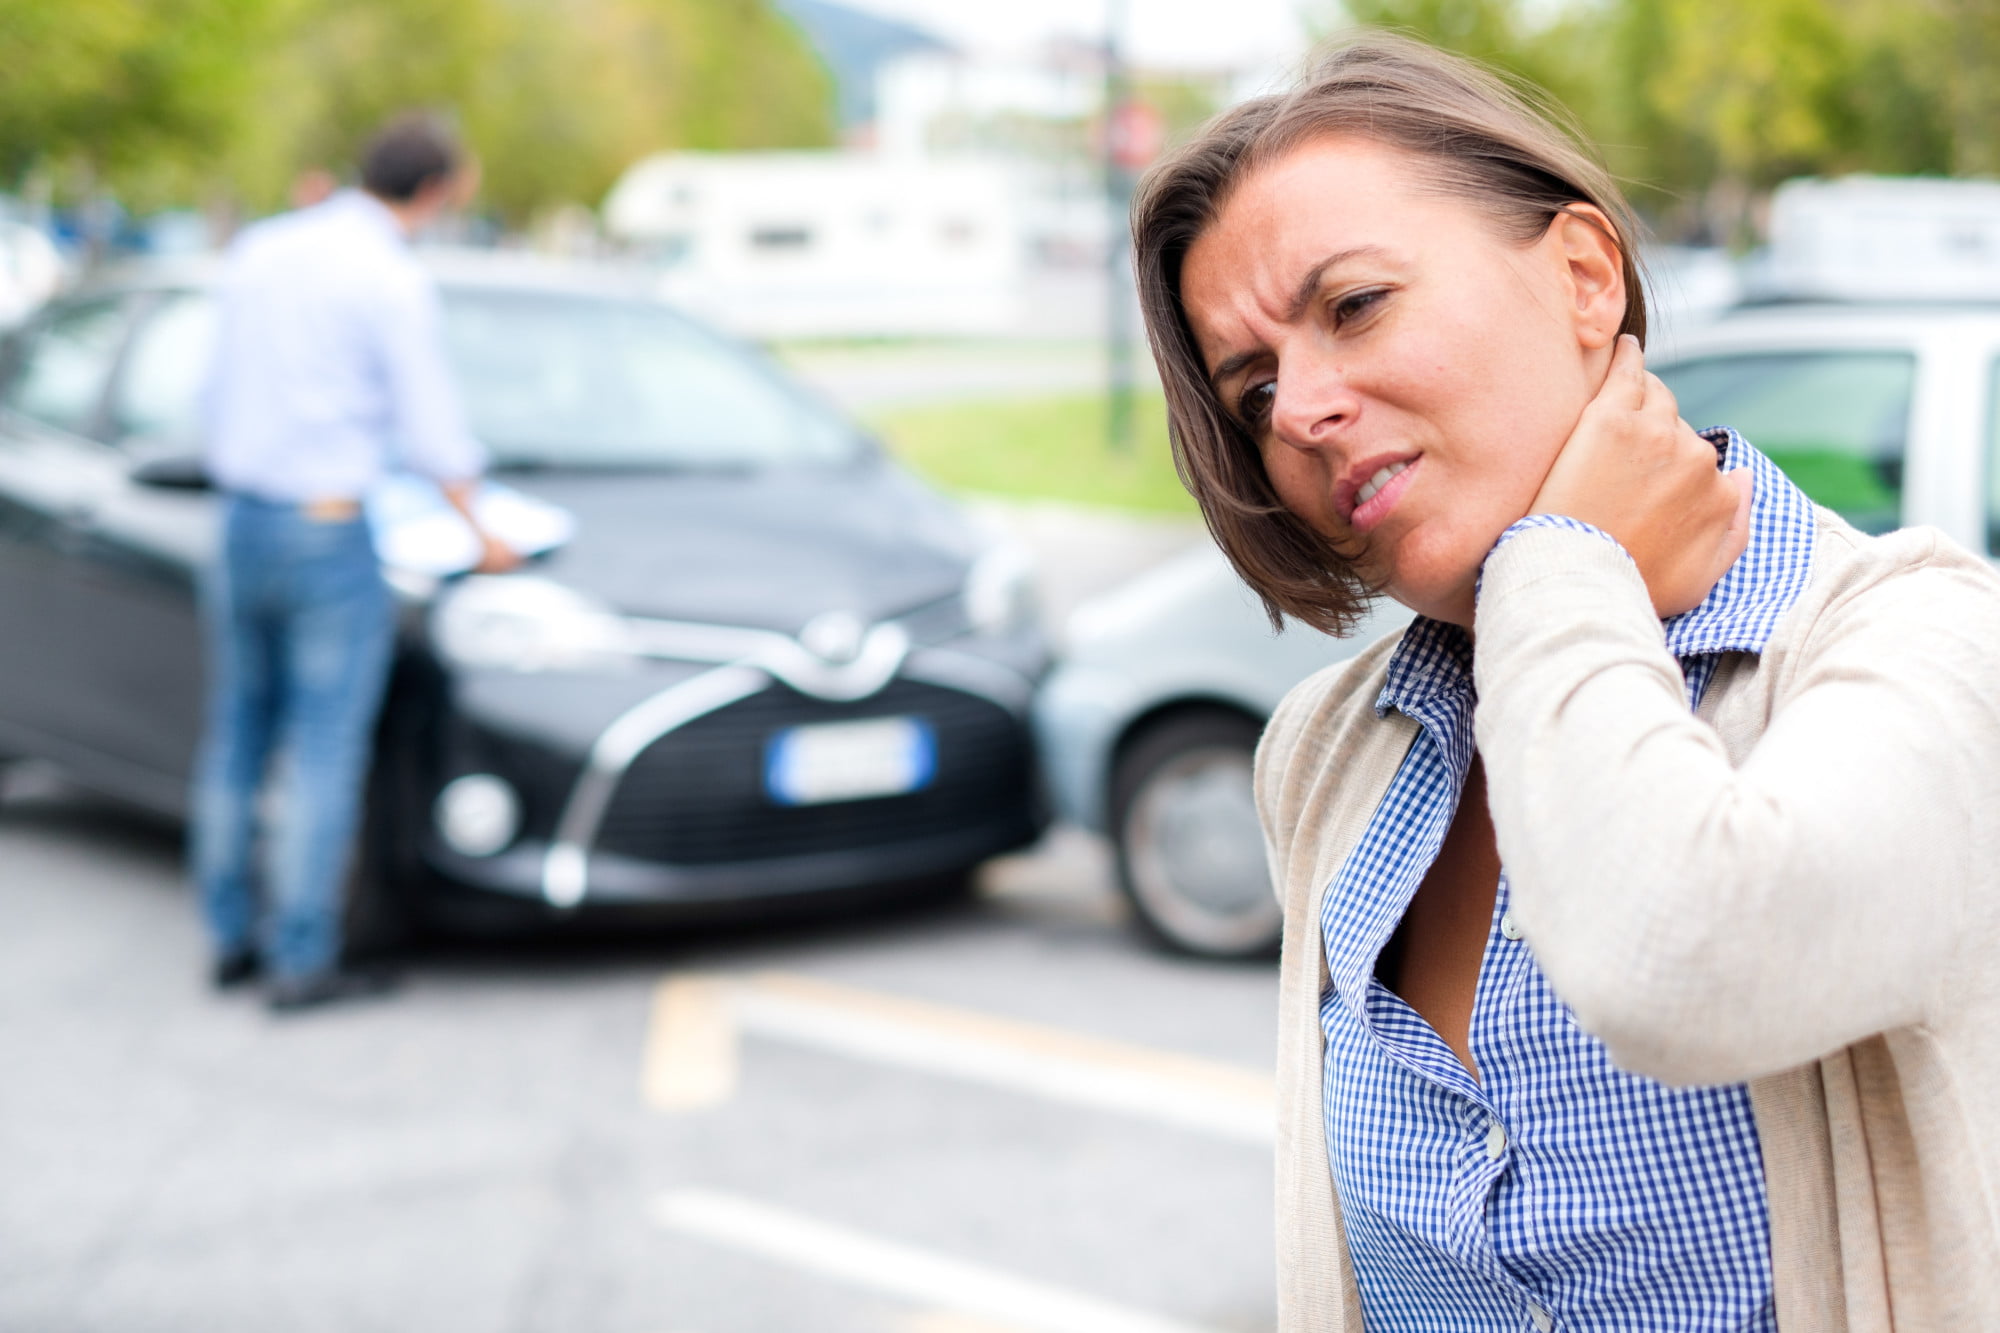 There are several car accident injuries that you need to avoid. Learn more about these crashes by checking out this guide.